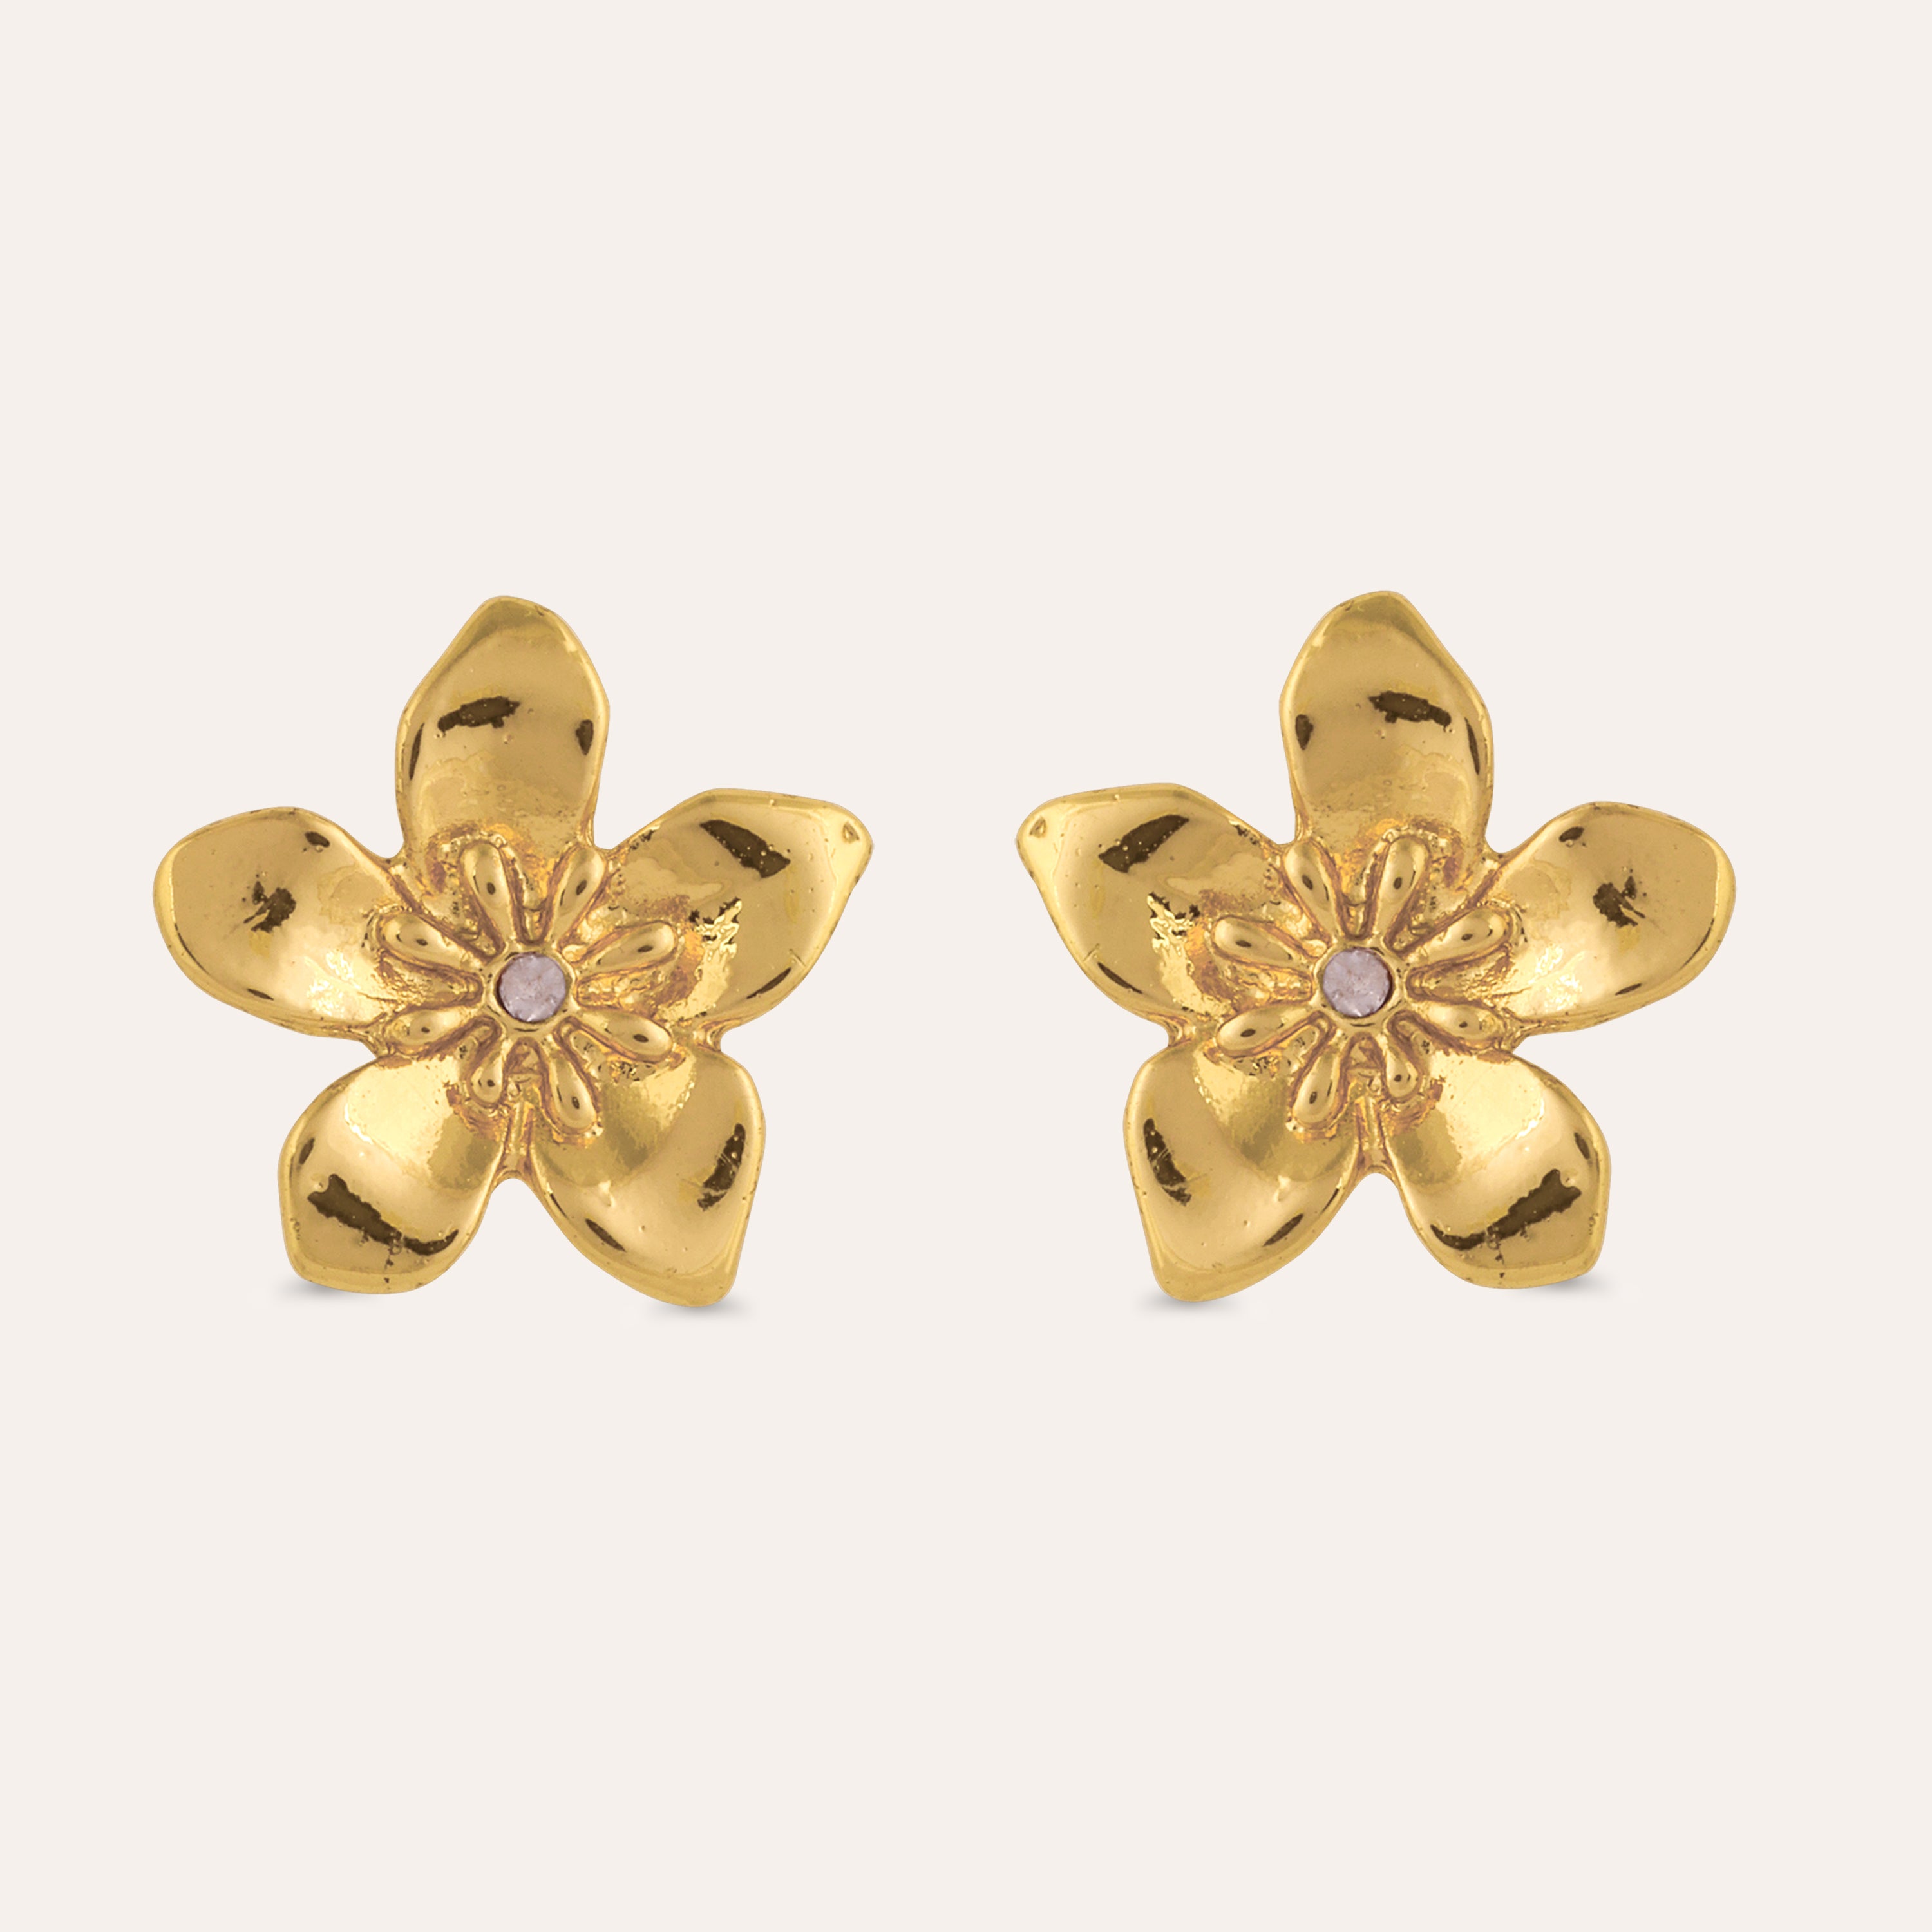 Aggregate more than 183 gold flower earrings studs